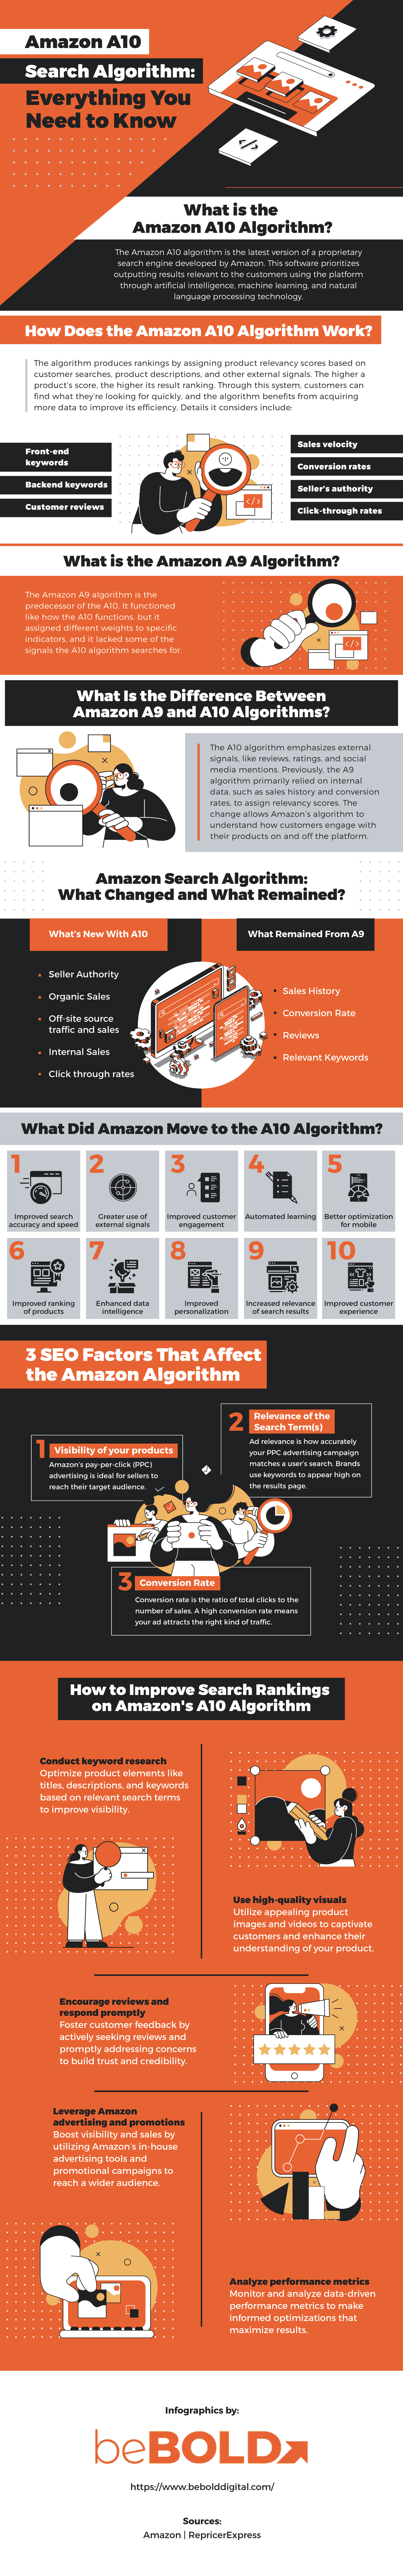 what is the amazon a10 algorithm